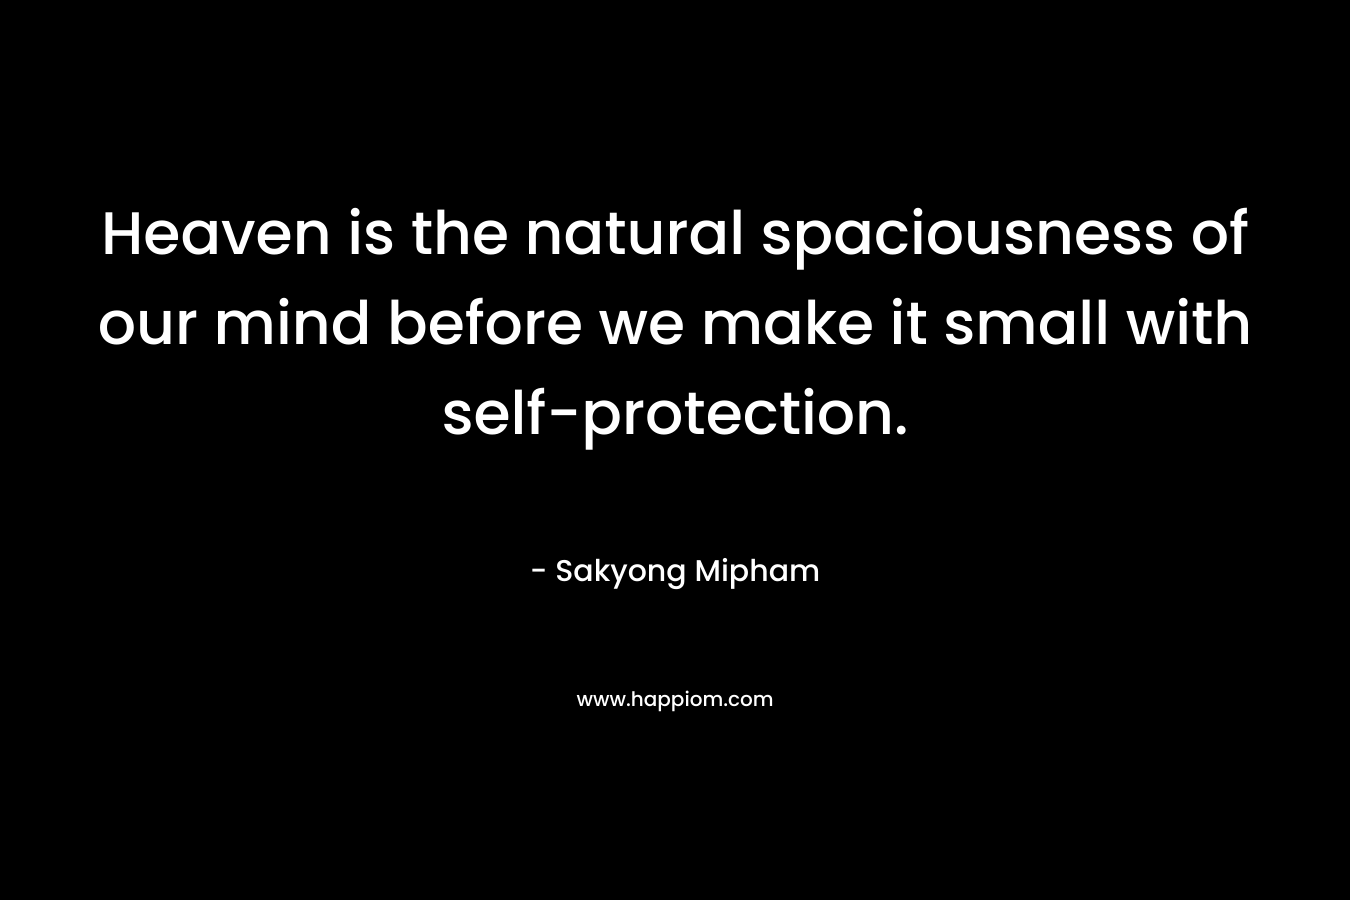 Heaven is the natural spaciousness of our mind before we make it small with self-protection. – Sakyong Mipham